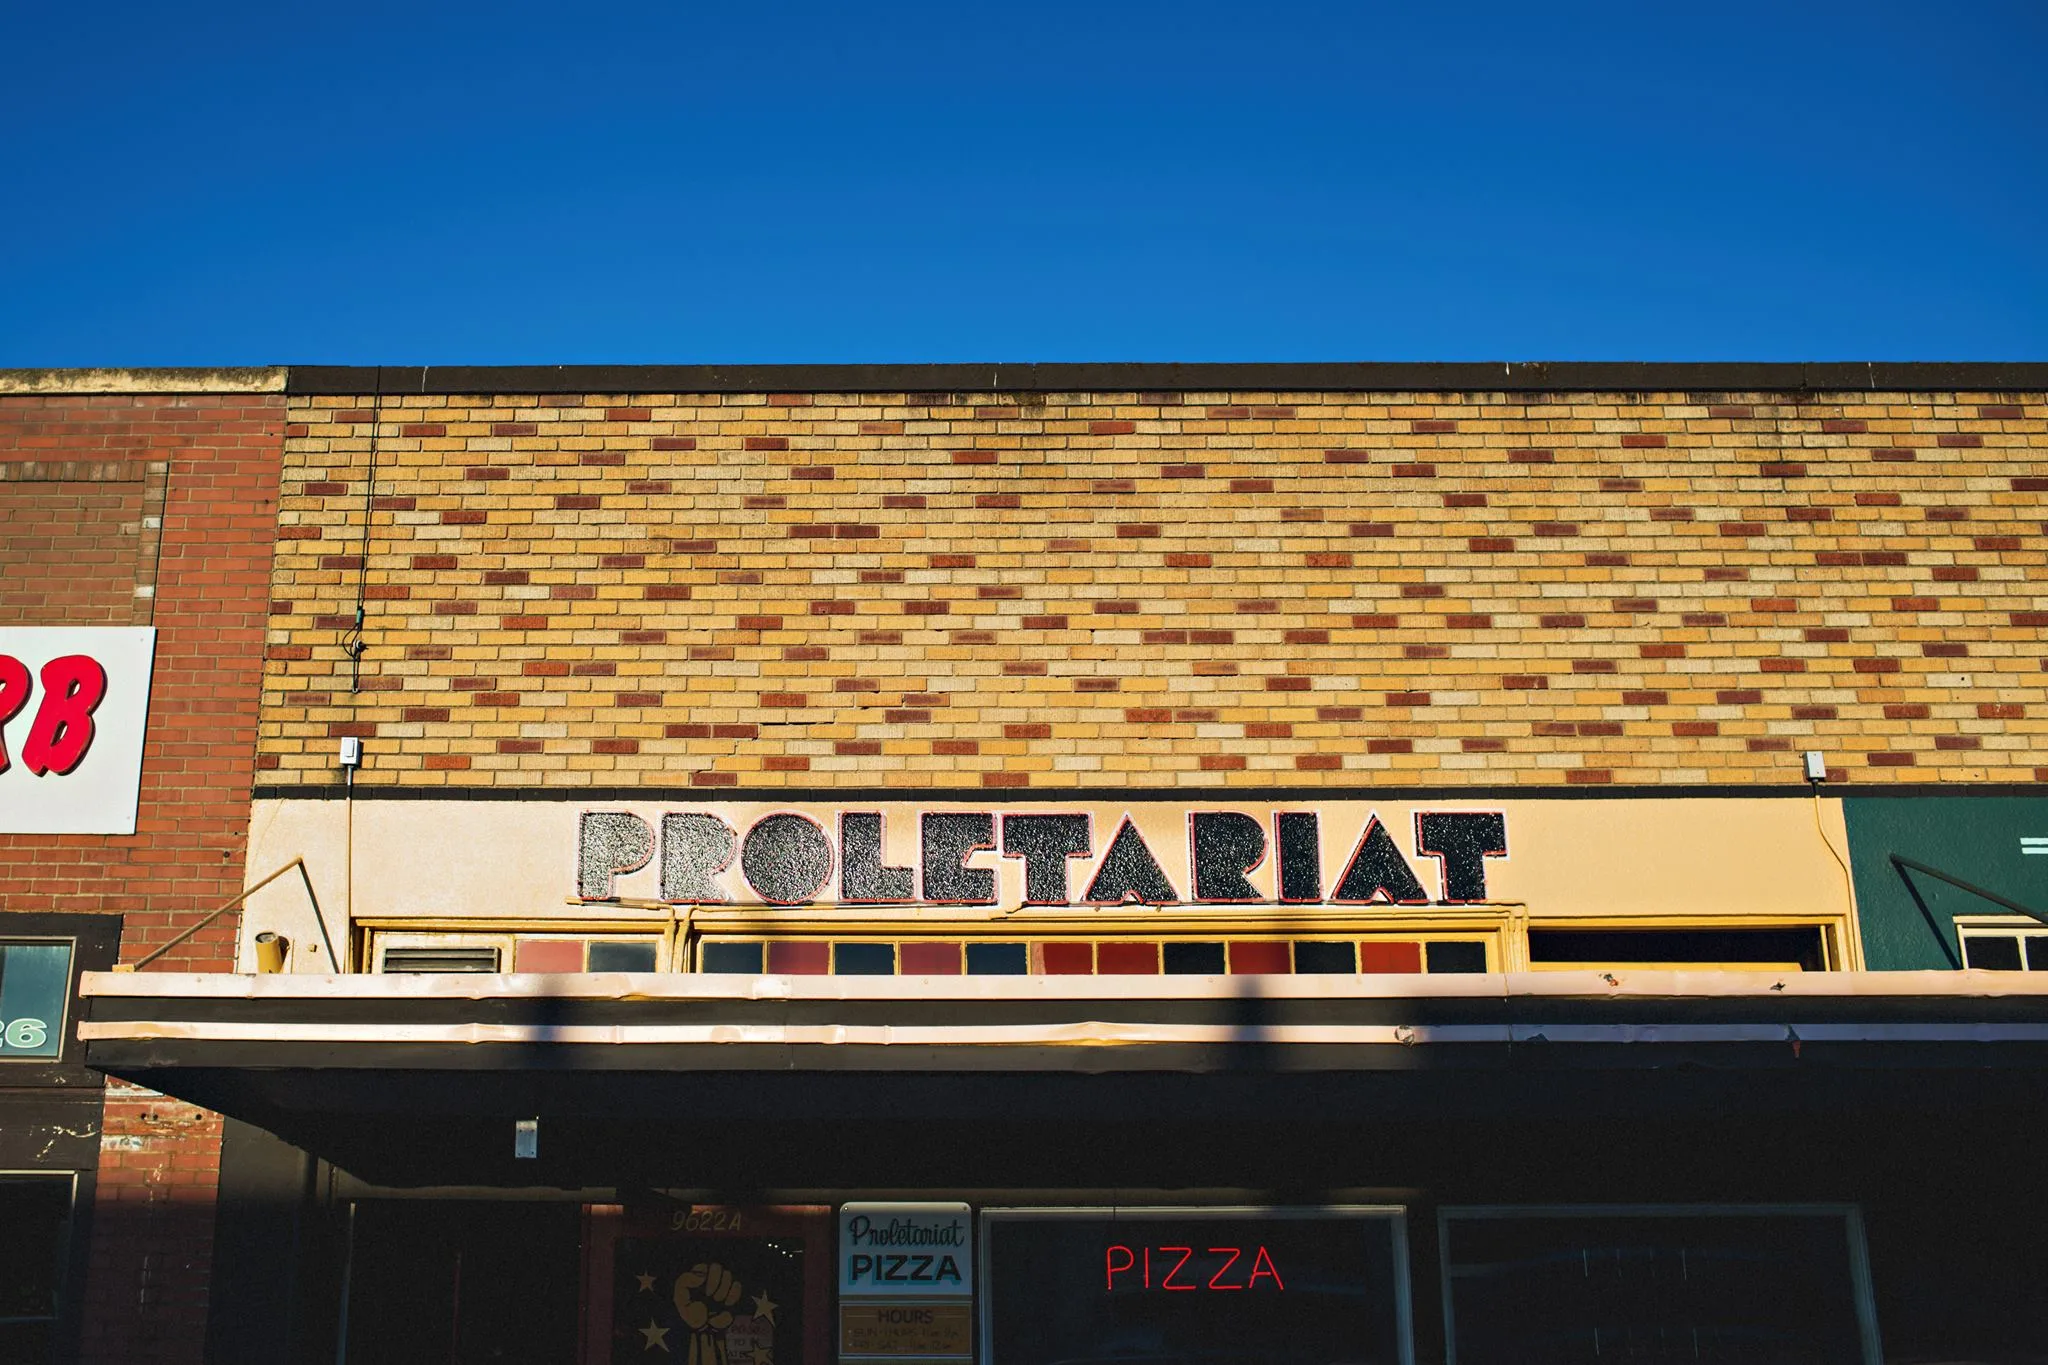 The storefront for Proletariat Pizza in White Center